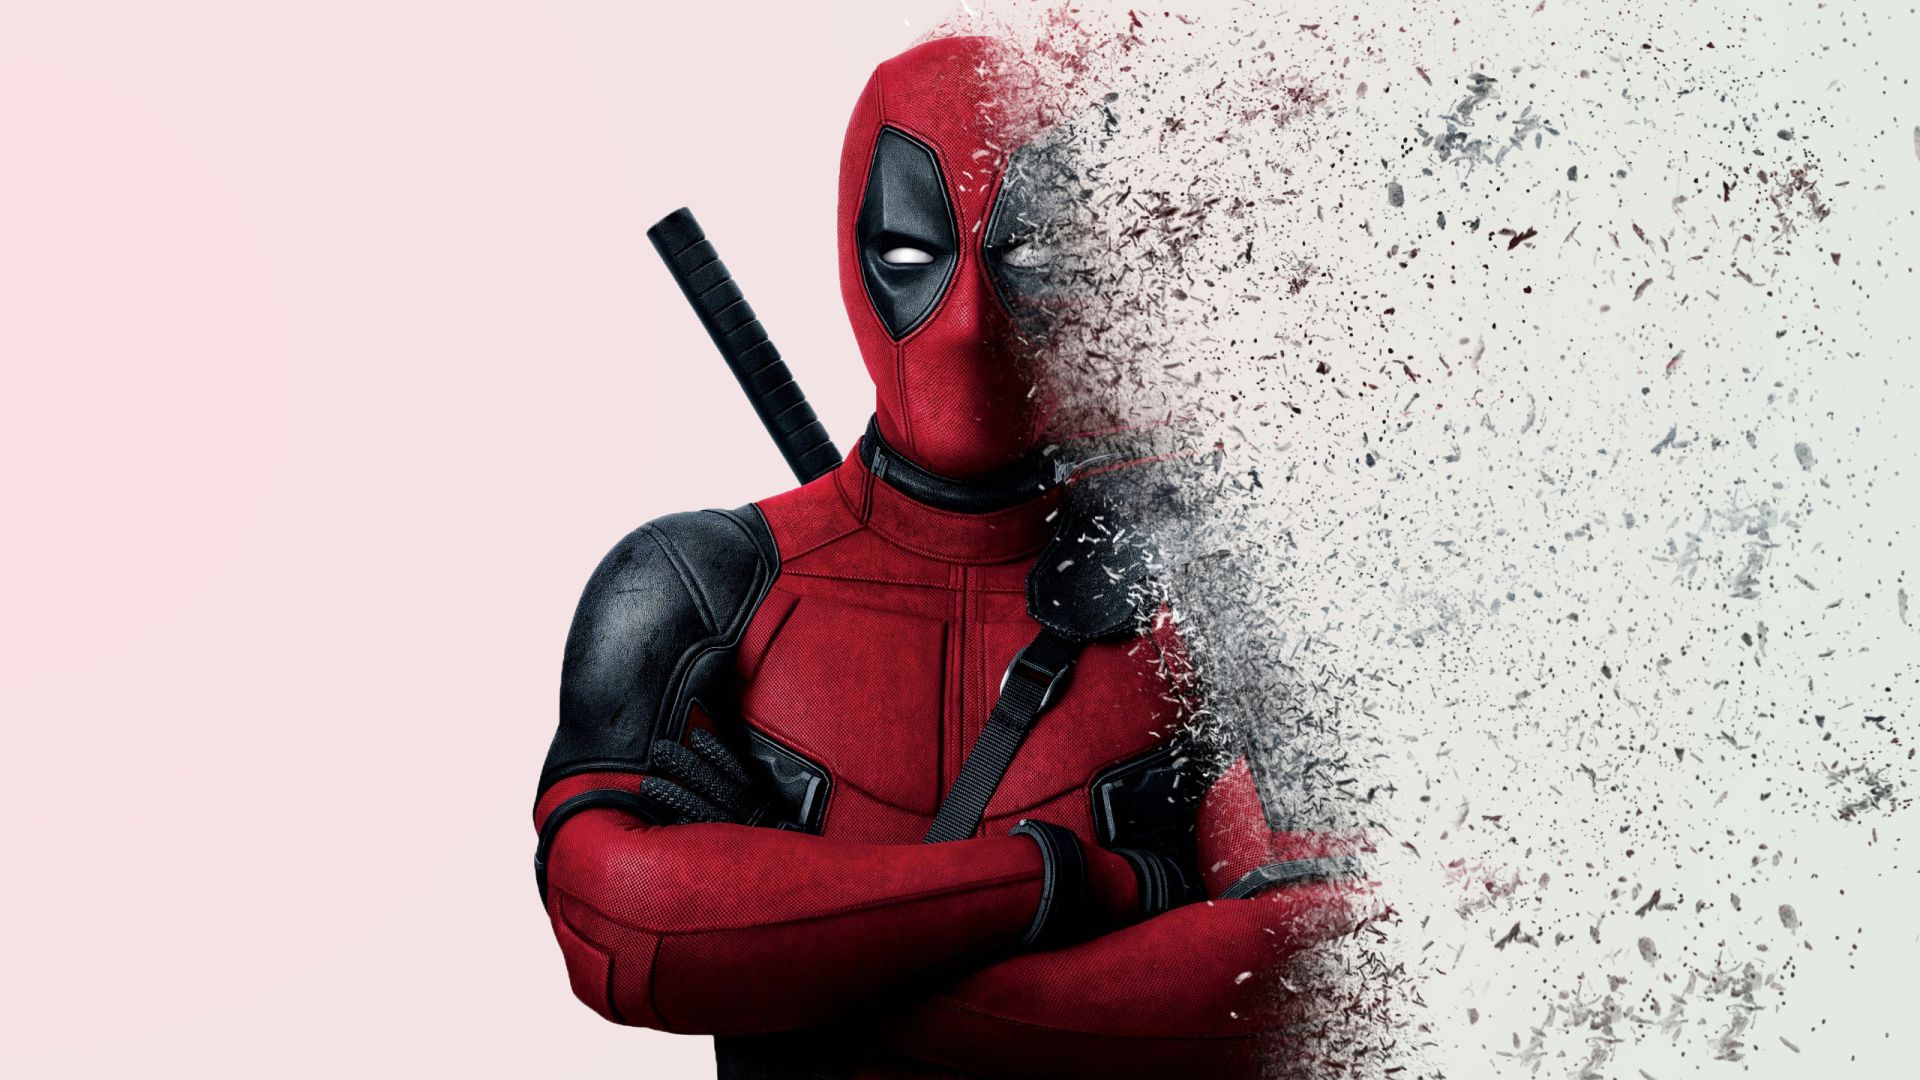 720 Deadpool HD Wallpapers and Backgrounds